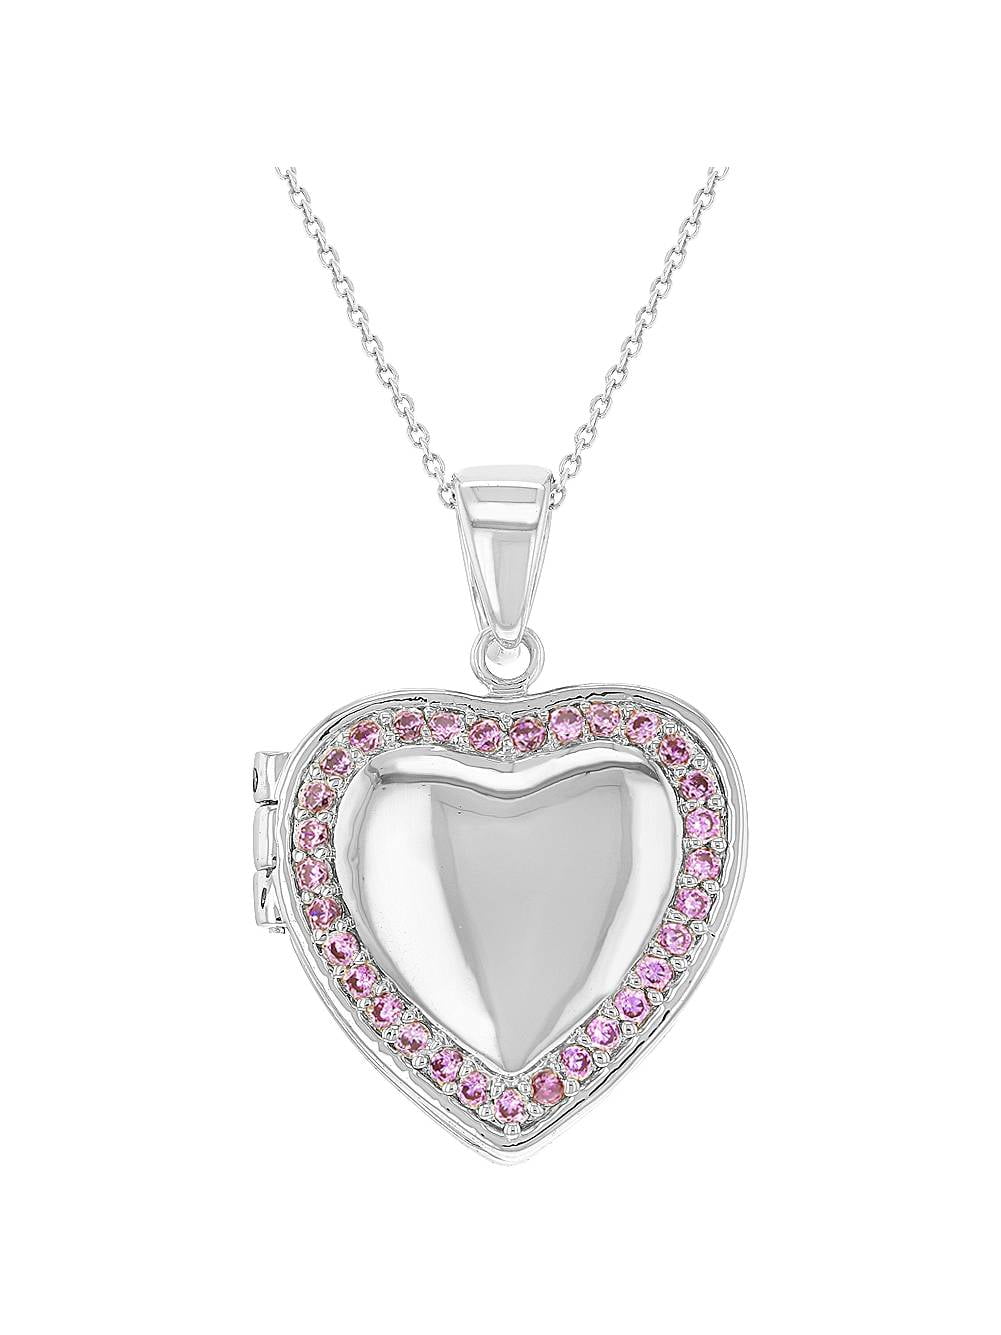 In Season Jewelry Remembrance I Love You Photo Heart Locket Pendant Necklace 19" 